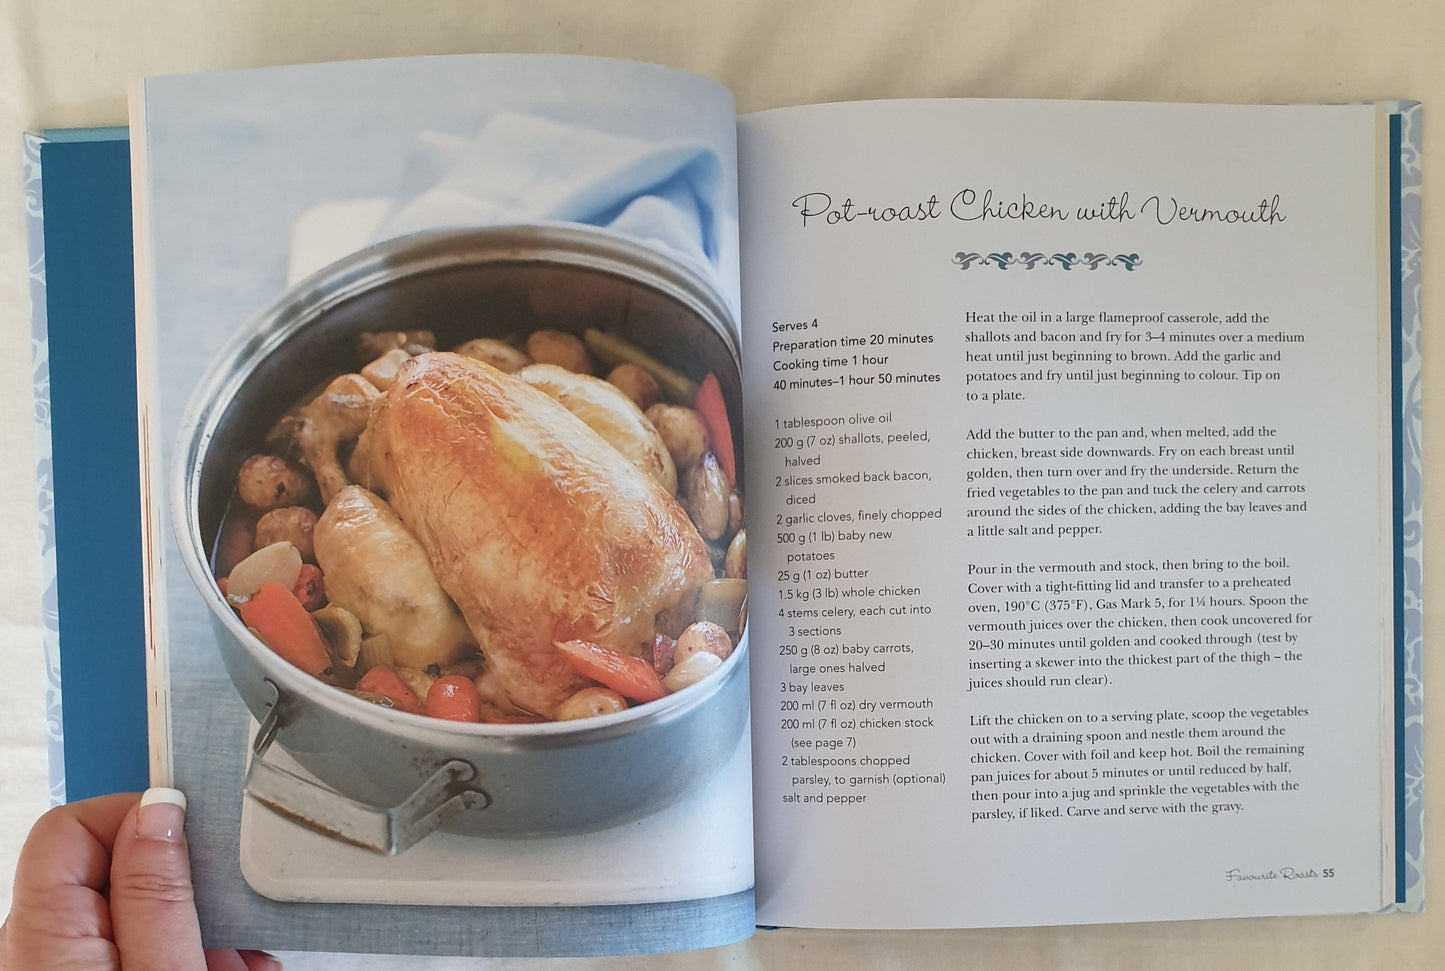 Mum's Favourite Slow-Cooked Classics by Bounty Books